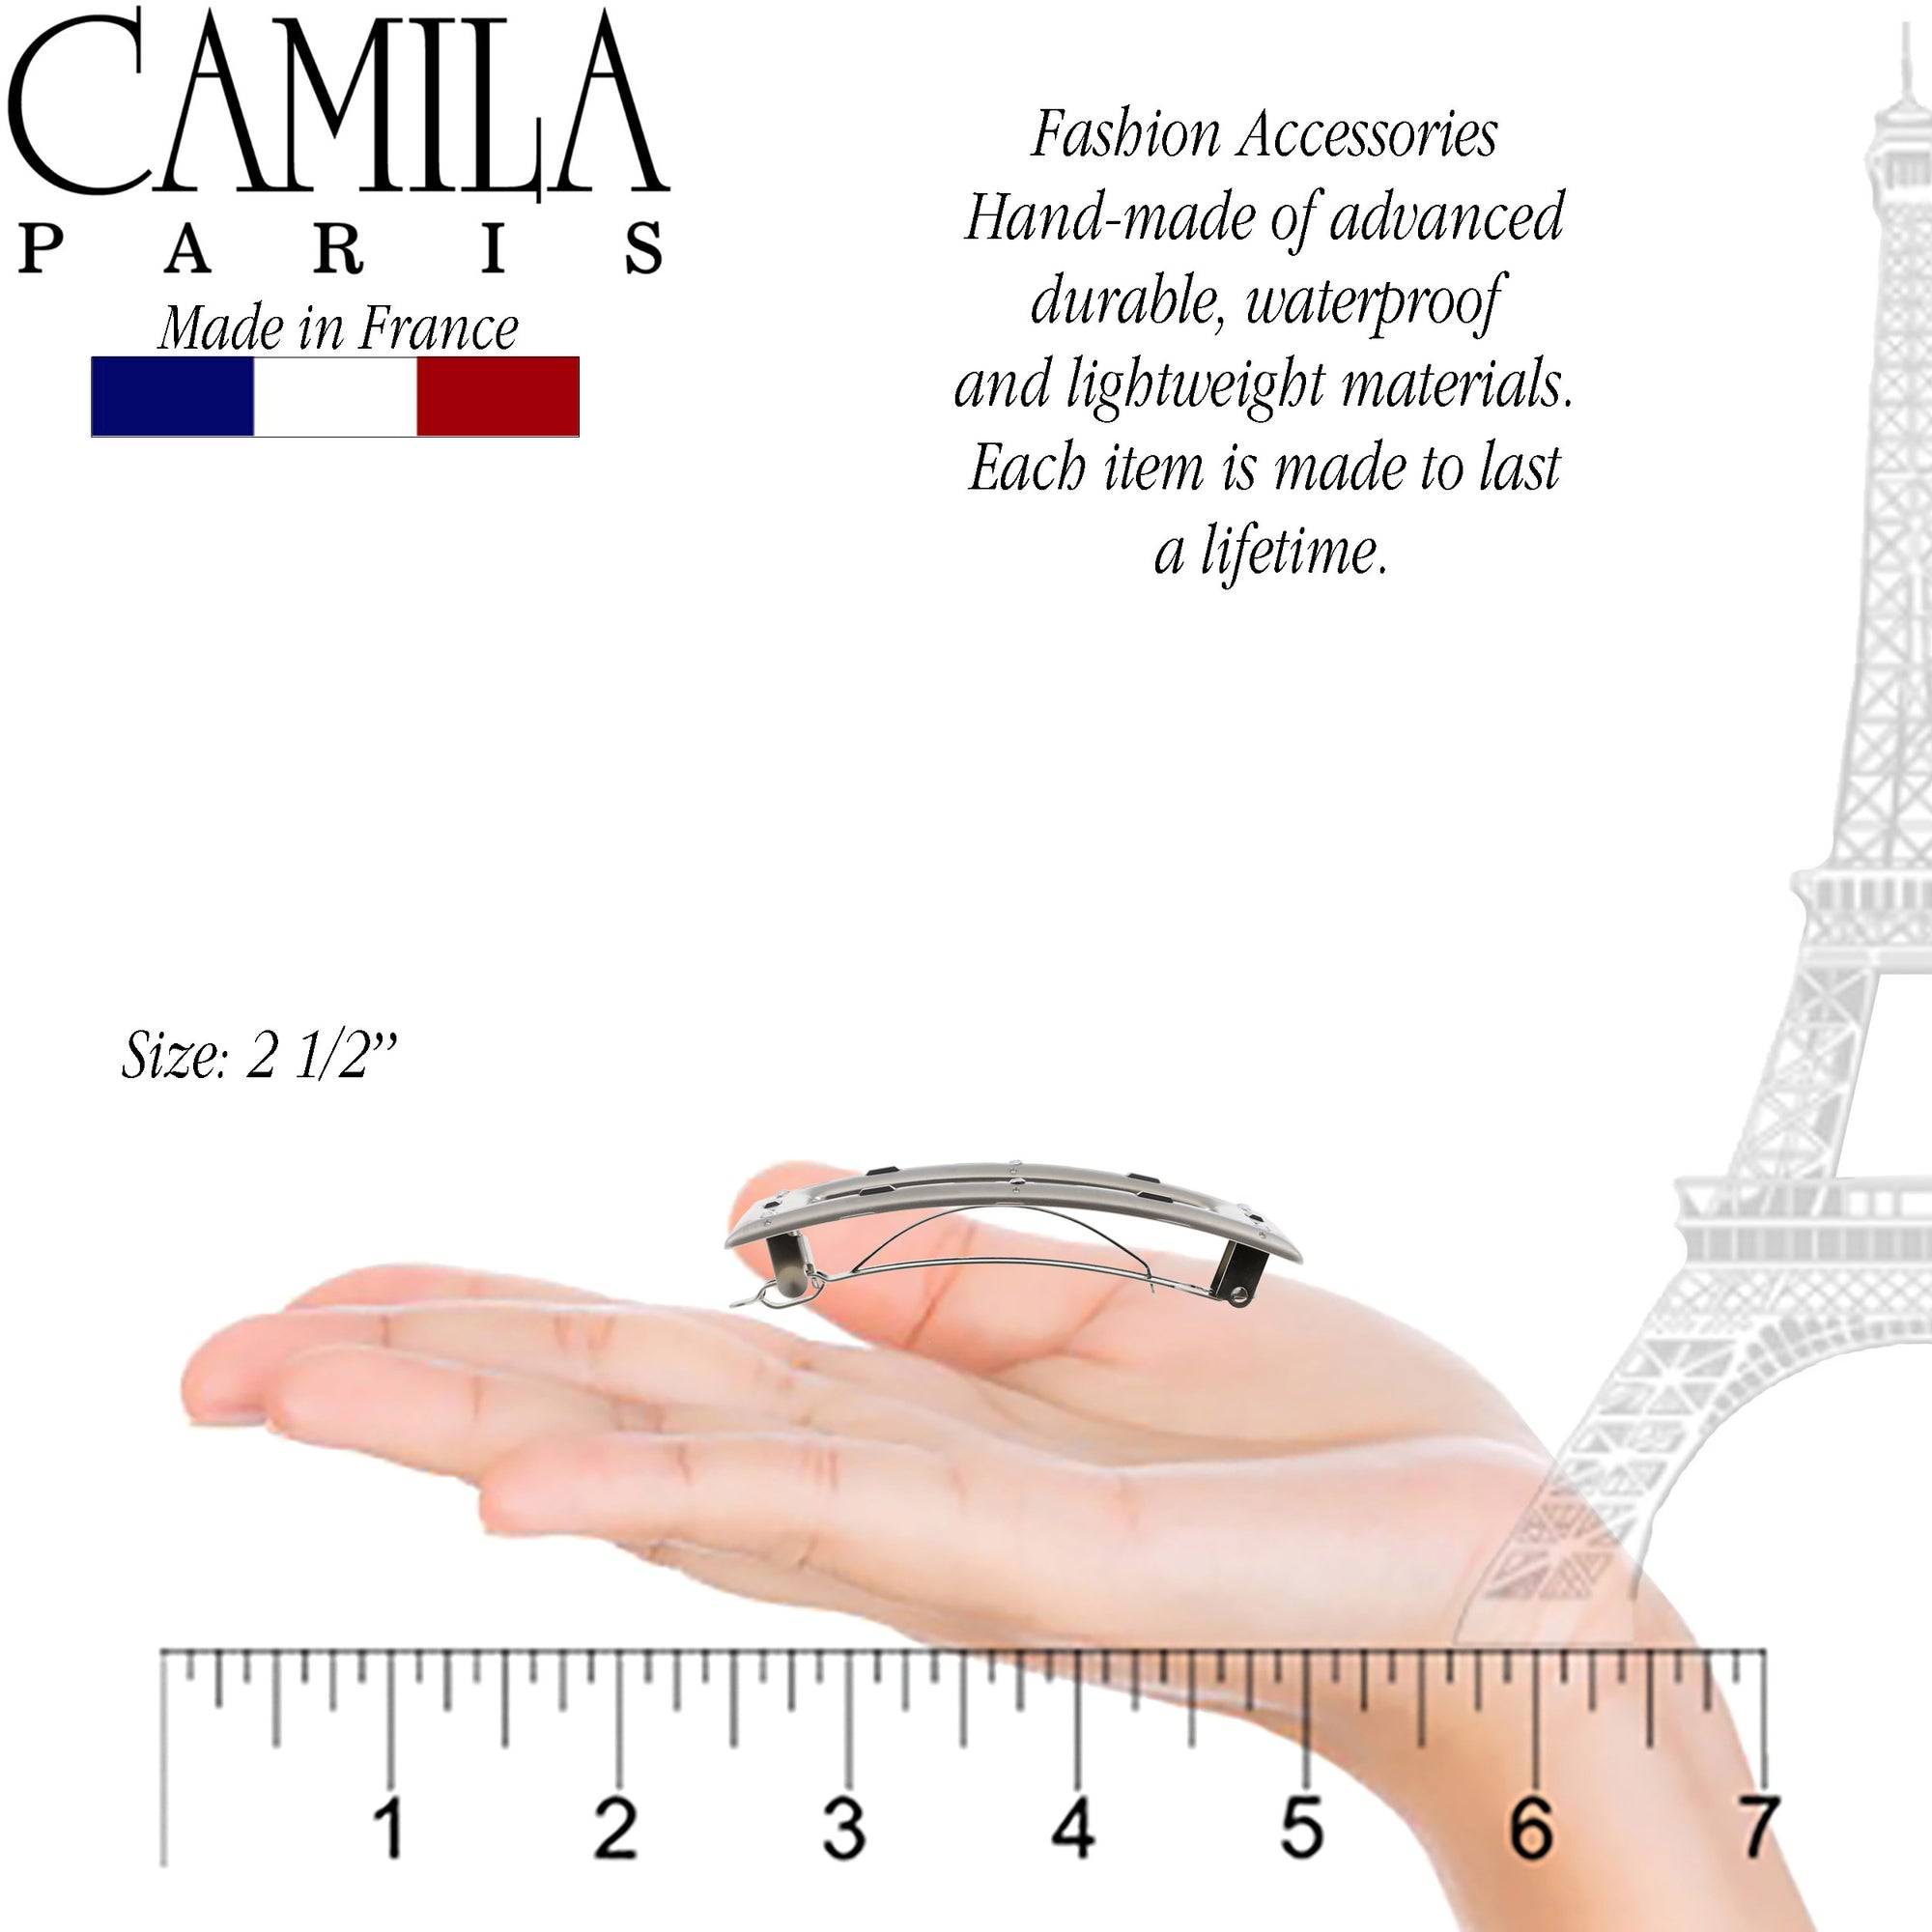 Camila Paris GA251 4 Inch Large Skinny Hair Barrette Clip Metal Silver, French Hair Accessories for Women, Handmade with Swarovski Crystals Stones. Styling Girls Hair Ornaments. Made in France